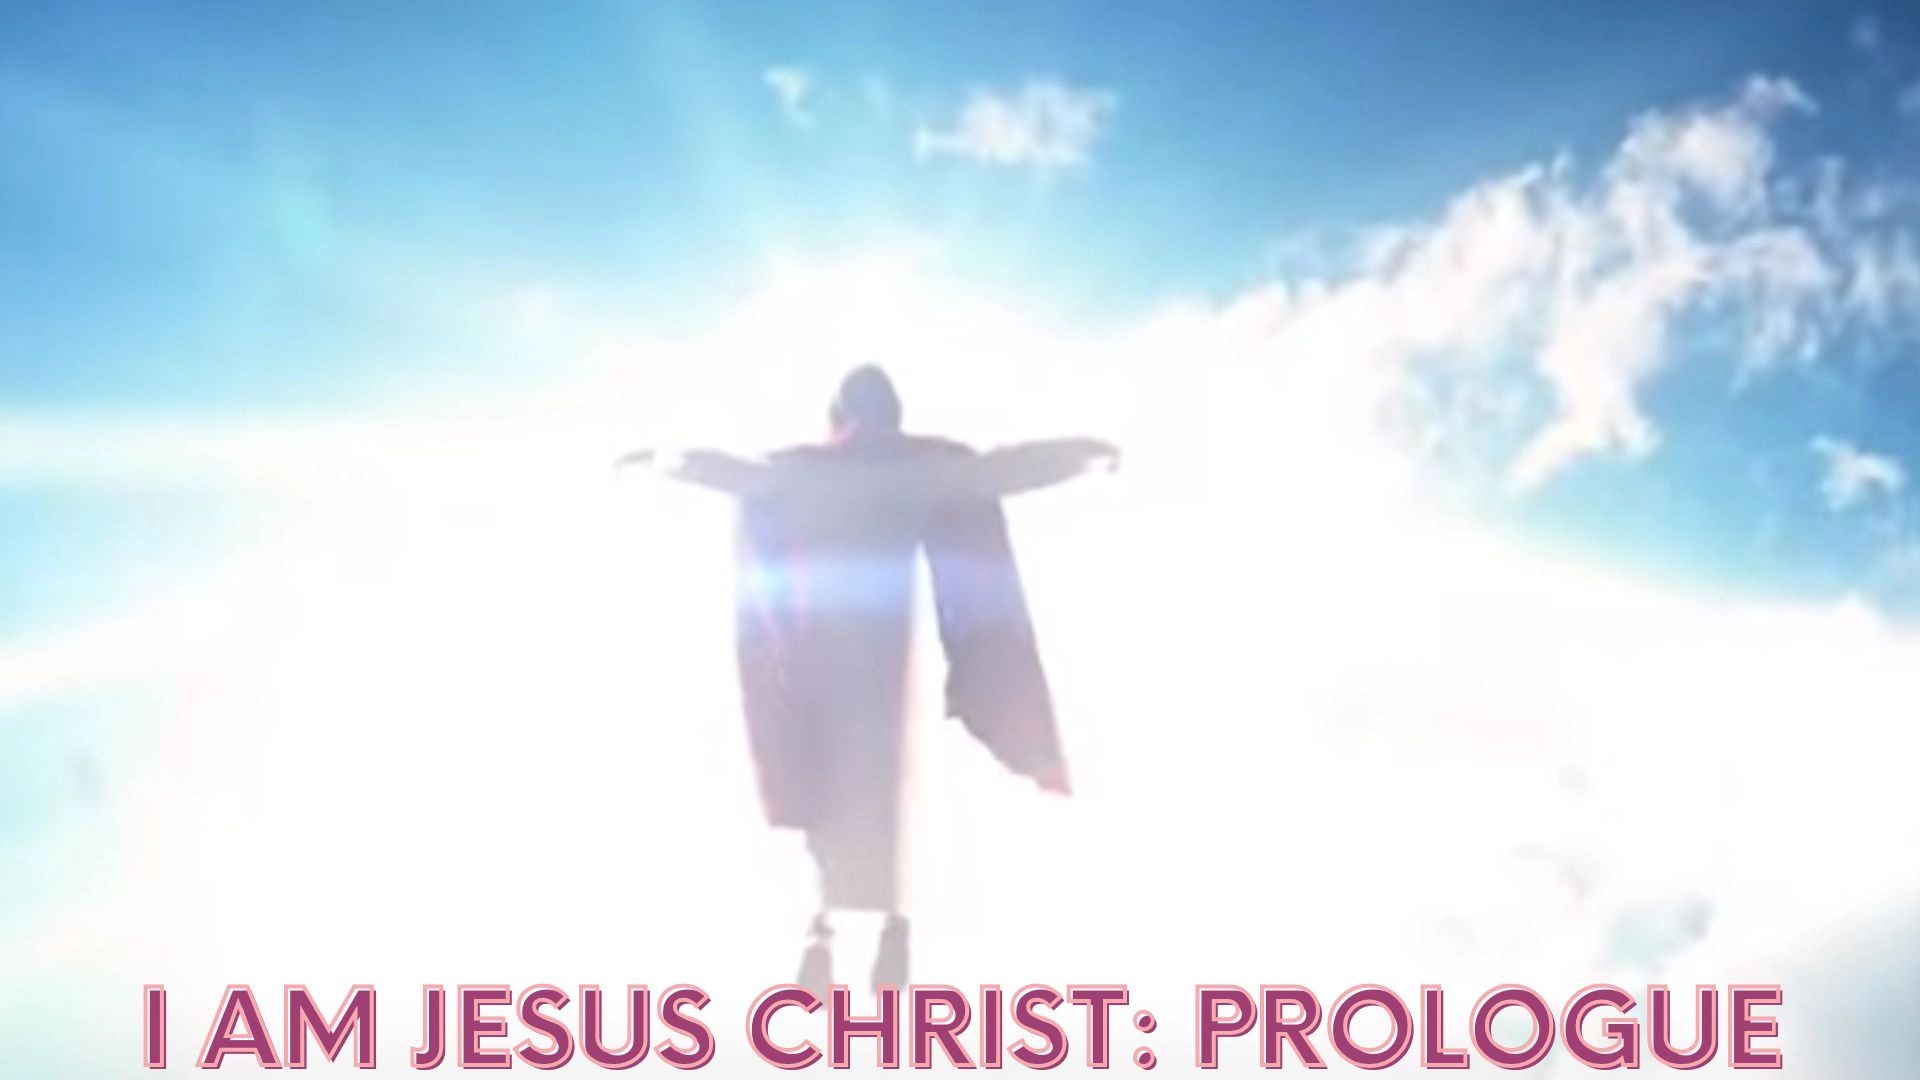 I Am Jesus Christ: Prologue Parents Guide and Age Rating